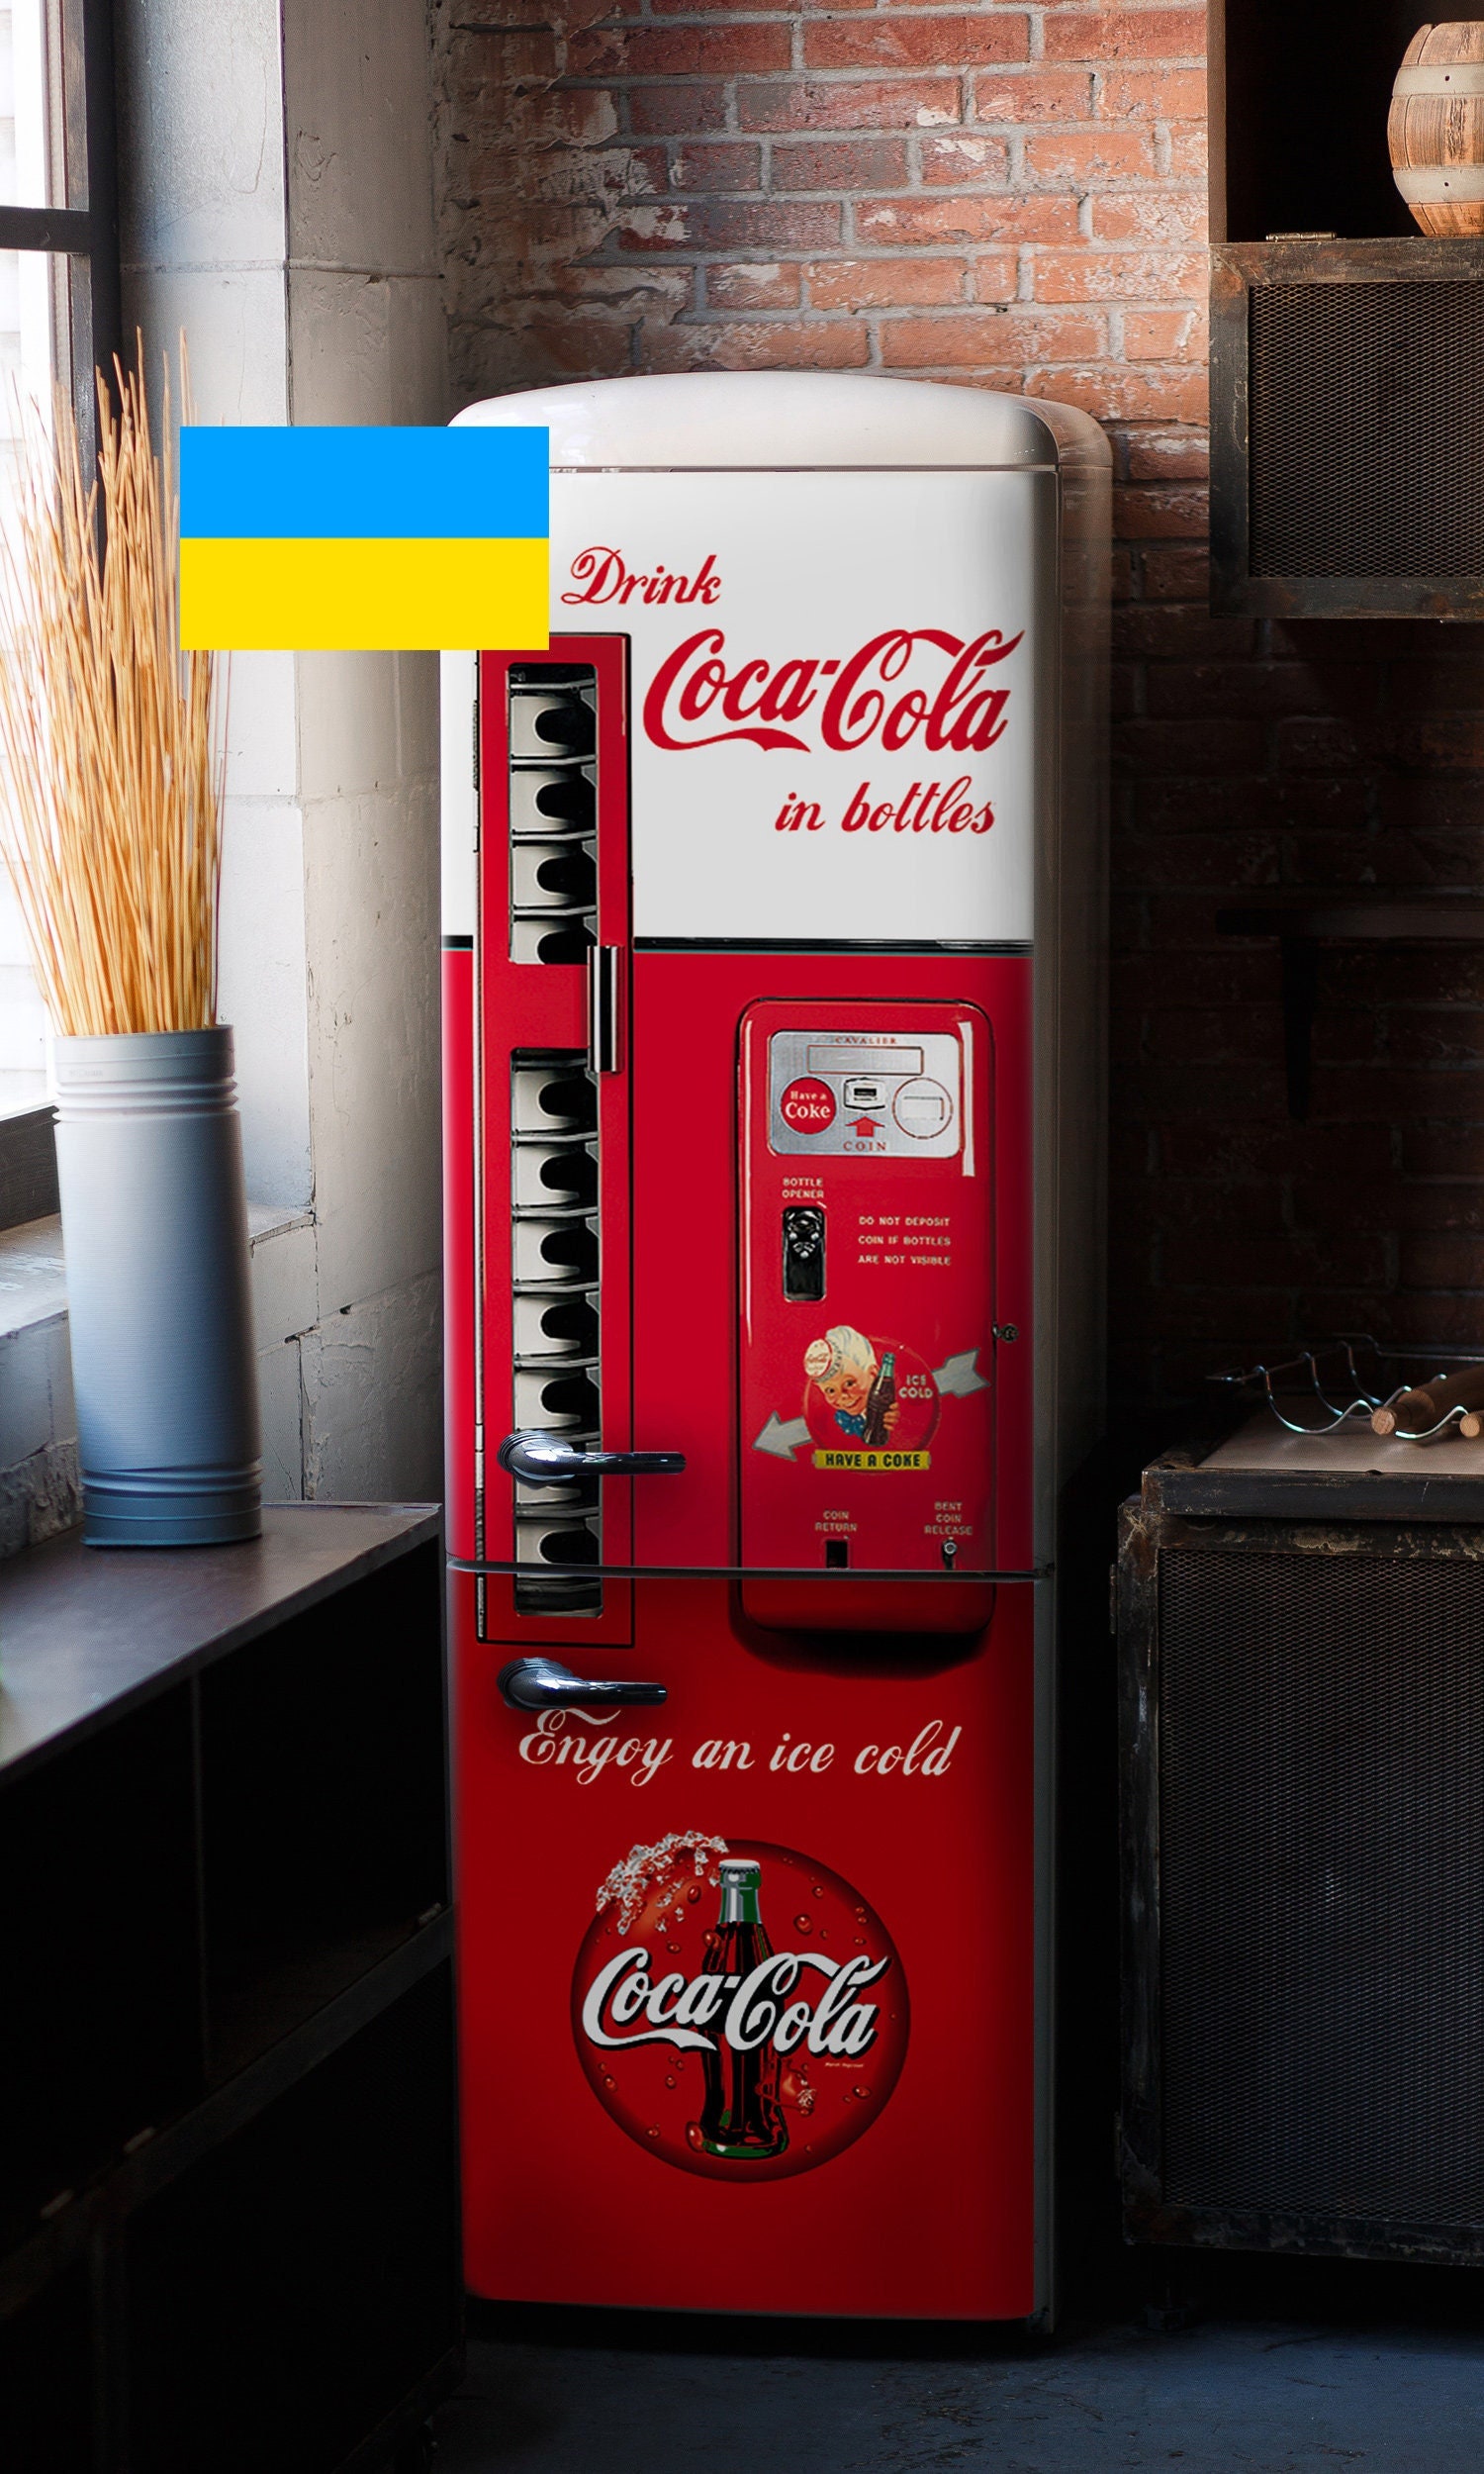 Read more about the article How to Get Coca-Cola Fridge for Free Uk<span class="rmp-archive-results-widget rmp-archive-results-widget--not-rated"><i class=" rmp-icon rmp-icon--ratings rmp-icon--star "></i><i class=" rmp-icon rmp-icon--ratings rmp-icon--star "></i><i class=" rmp-icon rmp-icon--ratings rmp-icon--star "></i><i class=" rmp-icon rmp-icon--ratings rmp-icon--star "></i><i class=" rmp-icon rmp-icon--ratings rmp-icon--star "></i> <span>0 (0)</span></span>